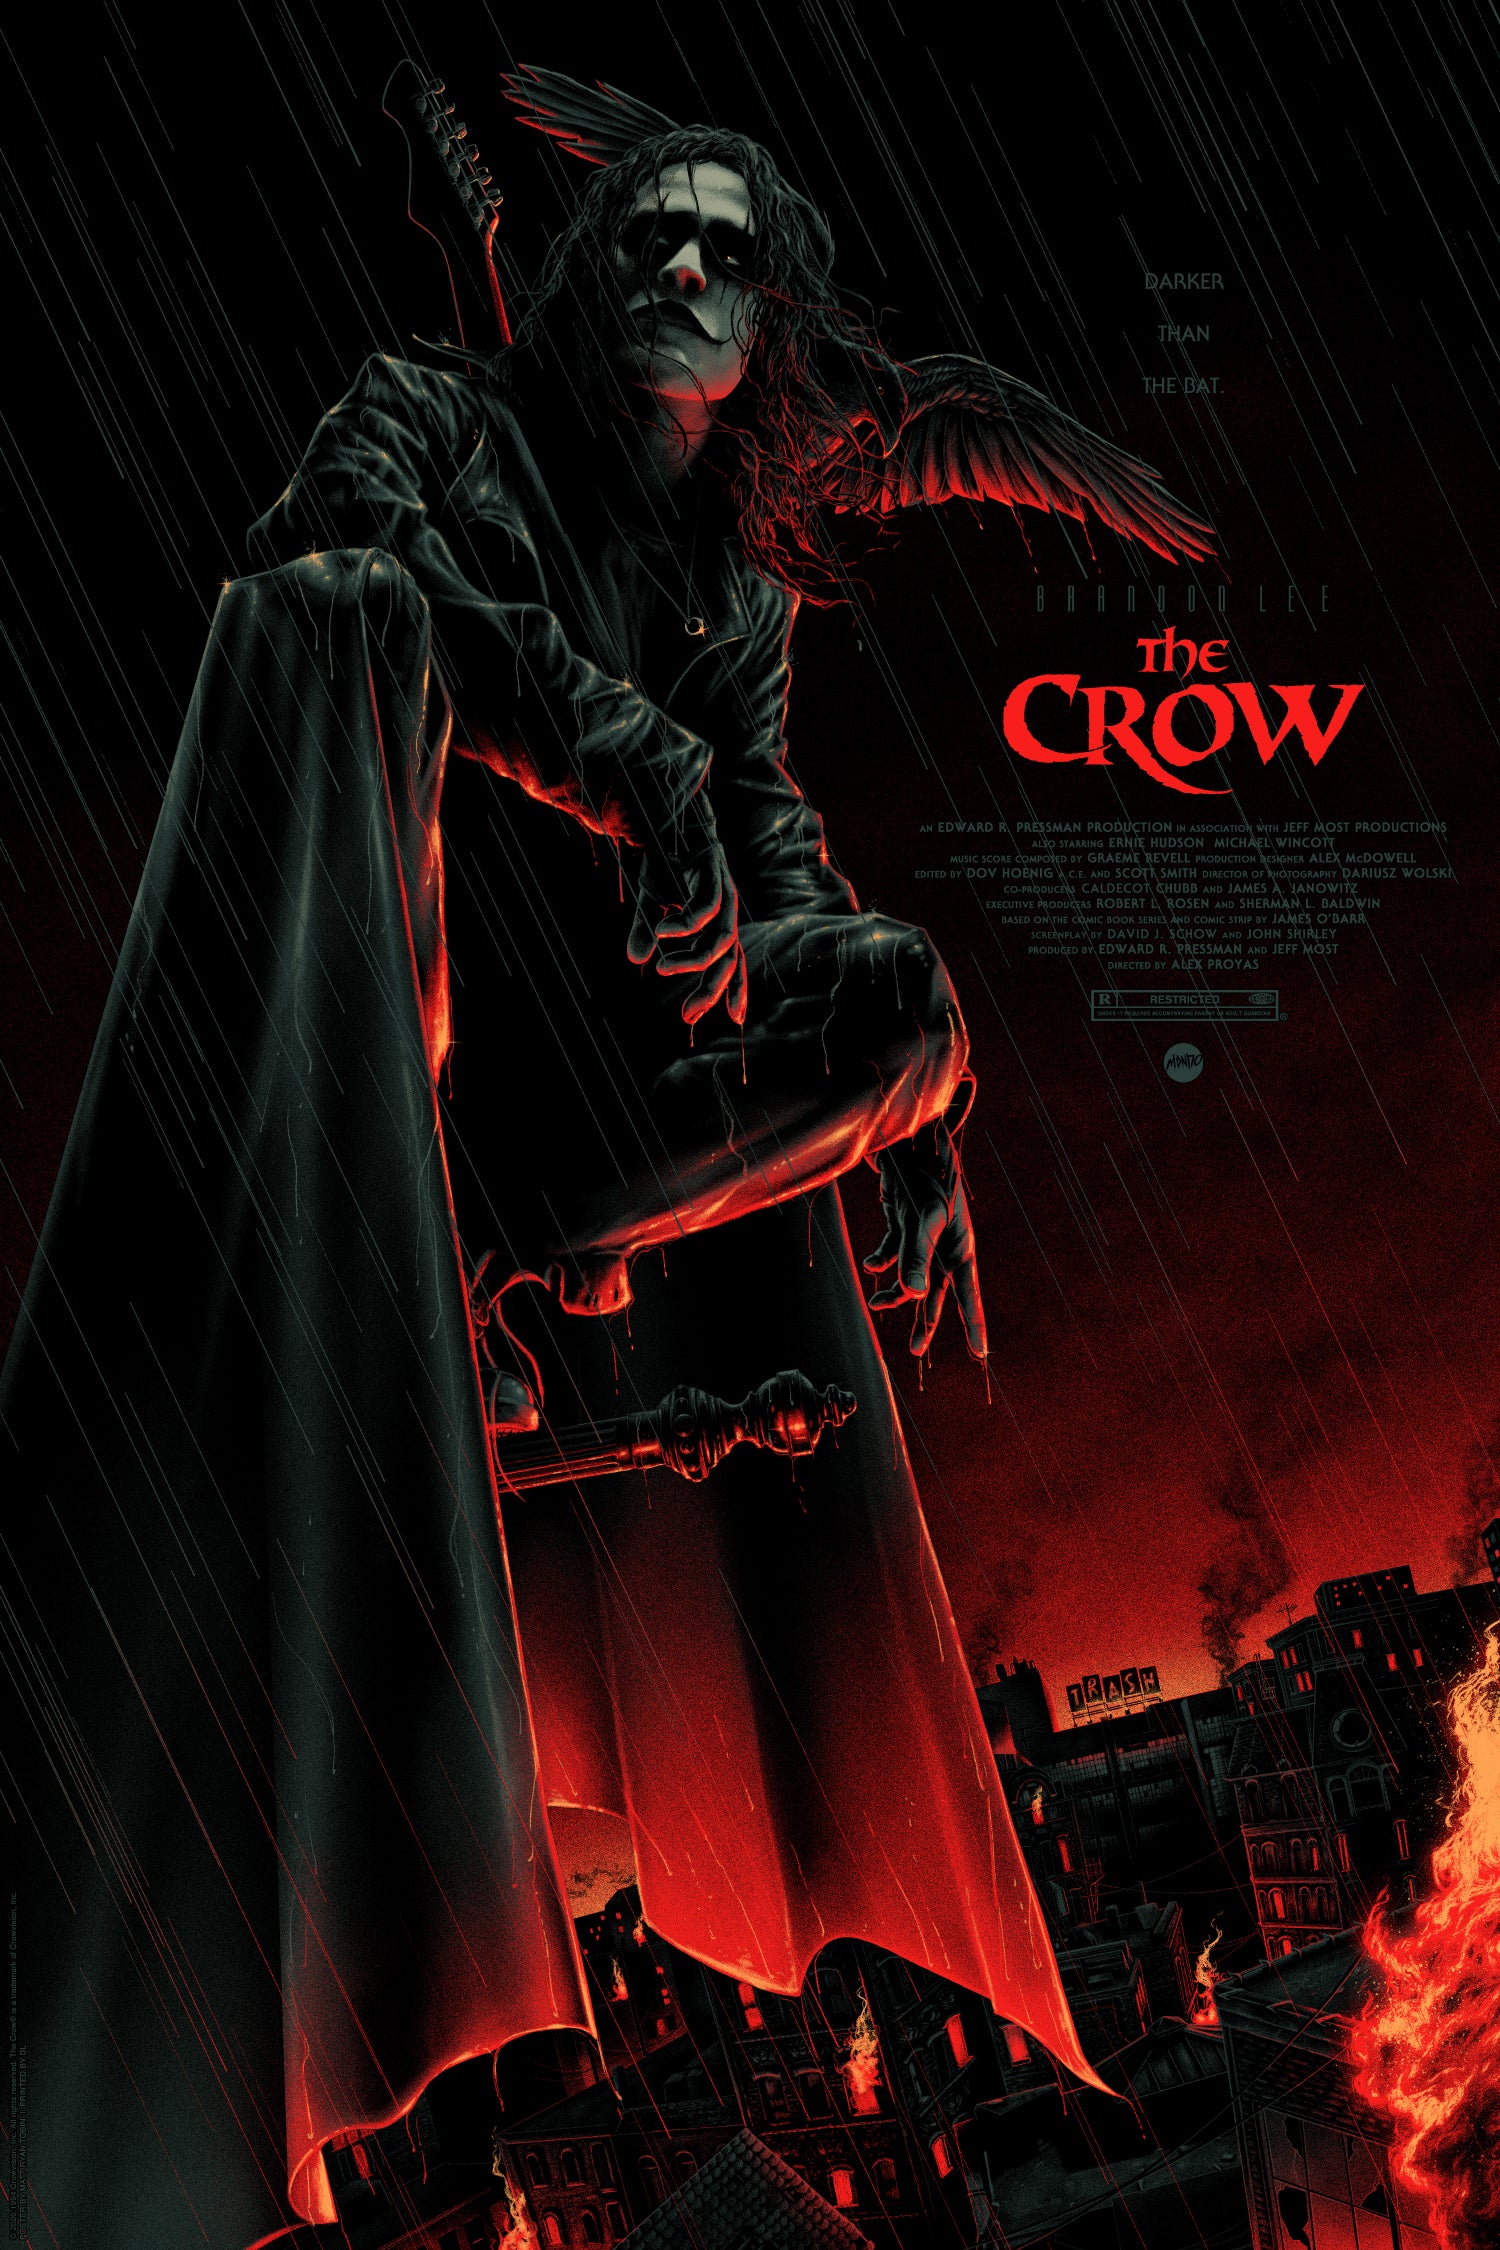 New Posters for THE CROW and THE RETURN OF THE LIVING DEAD On Sale Thu